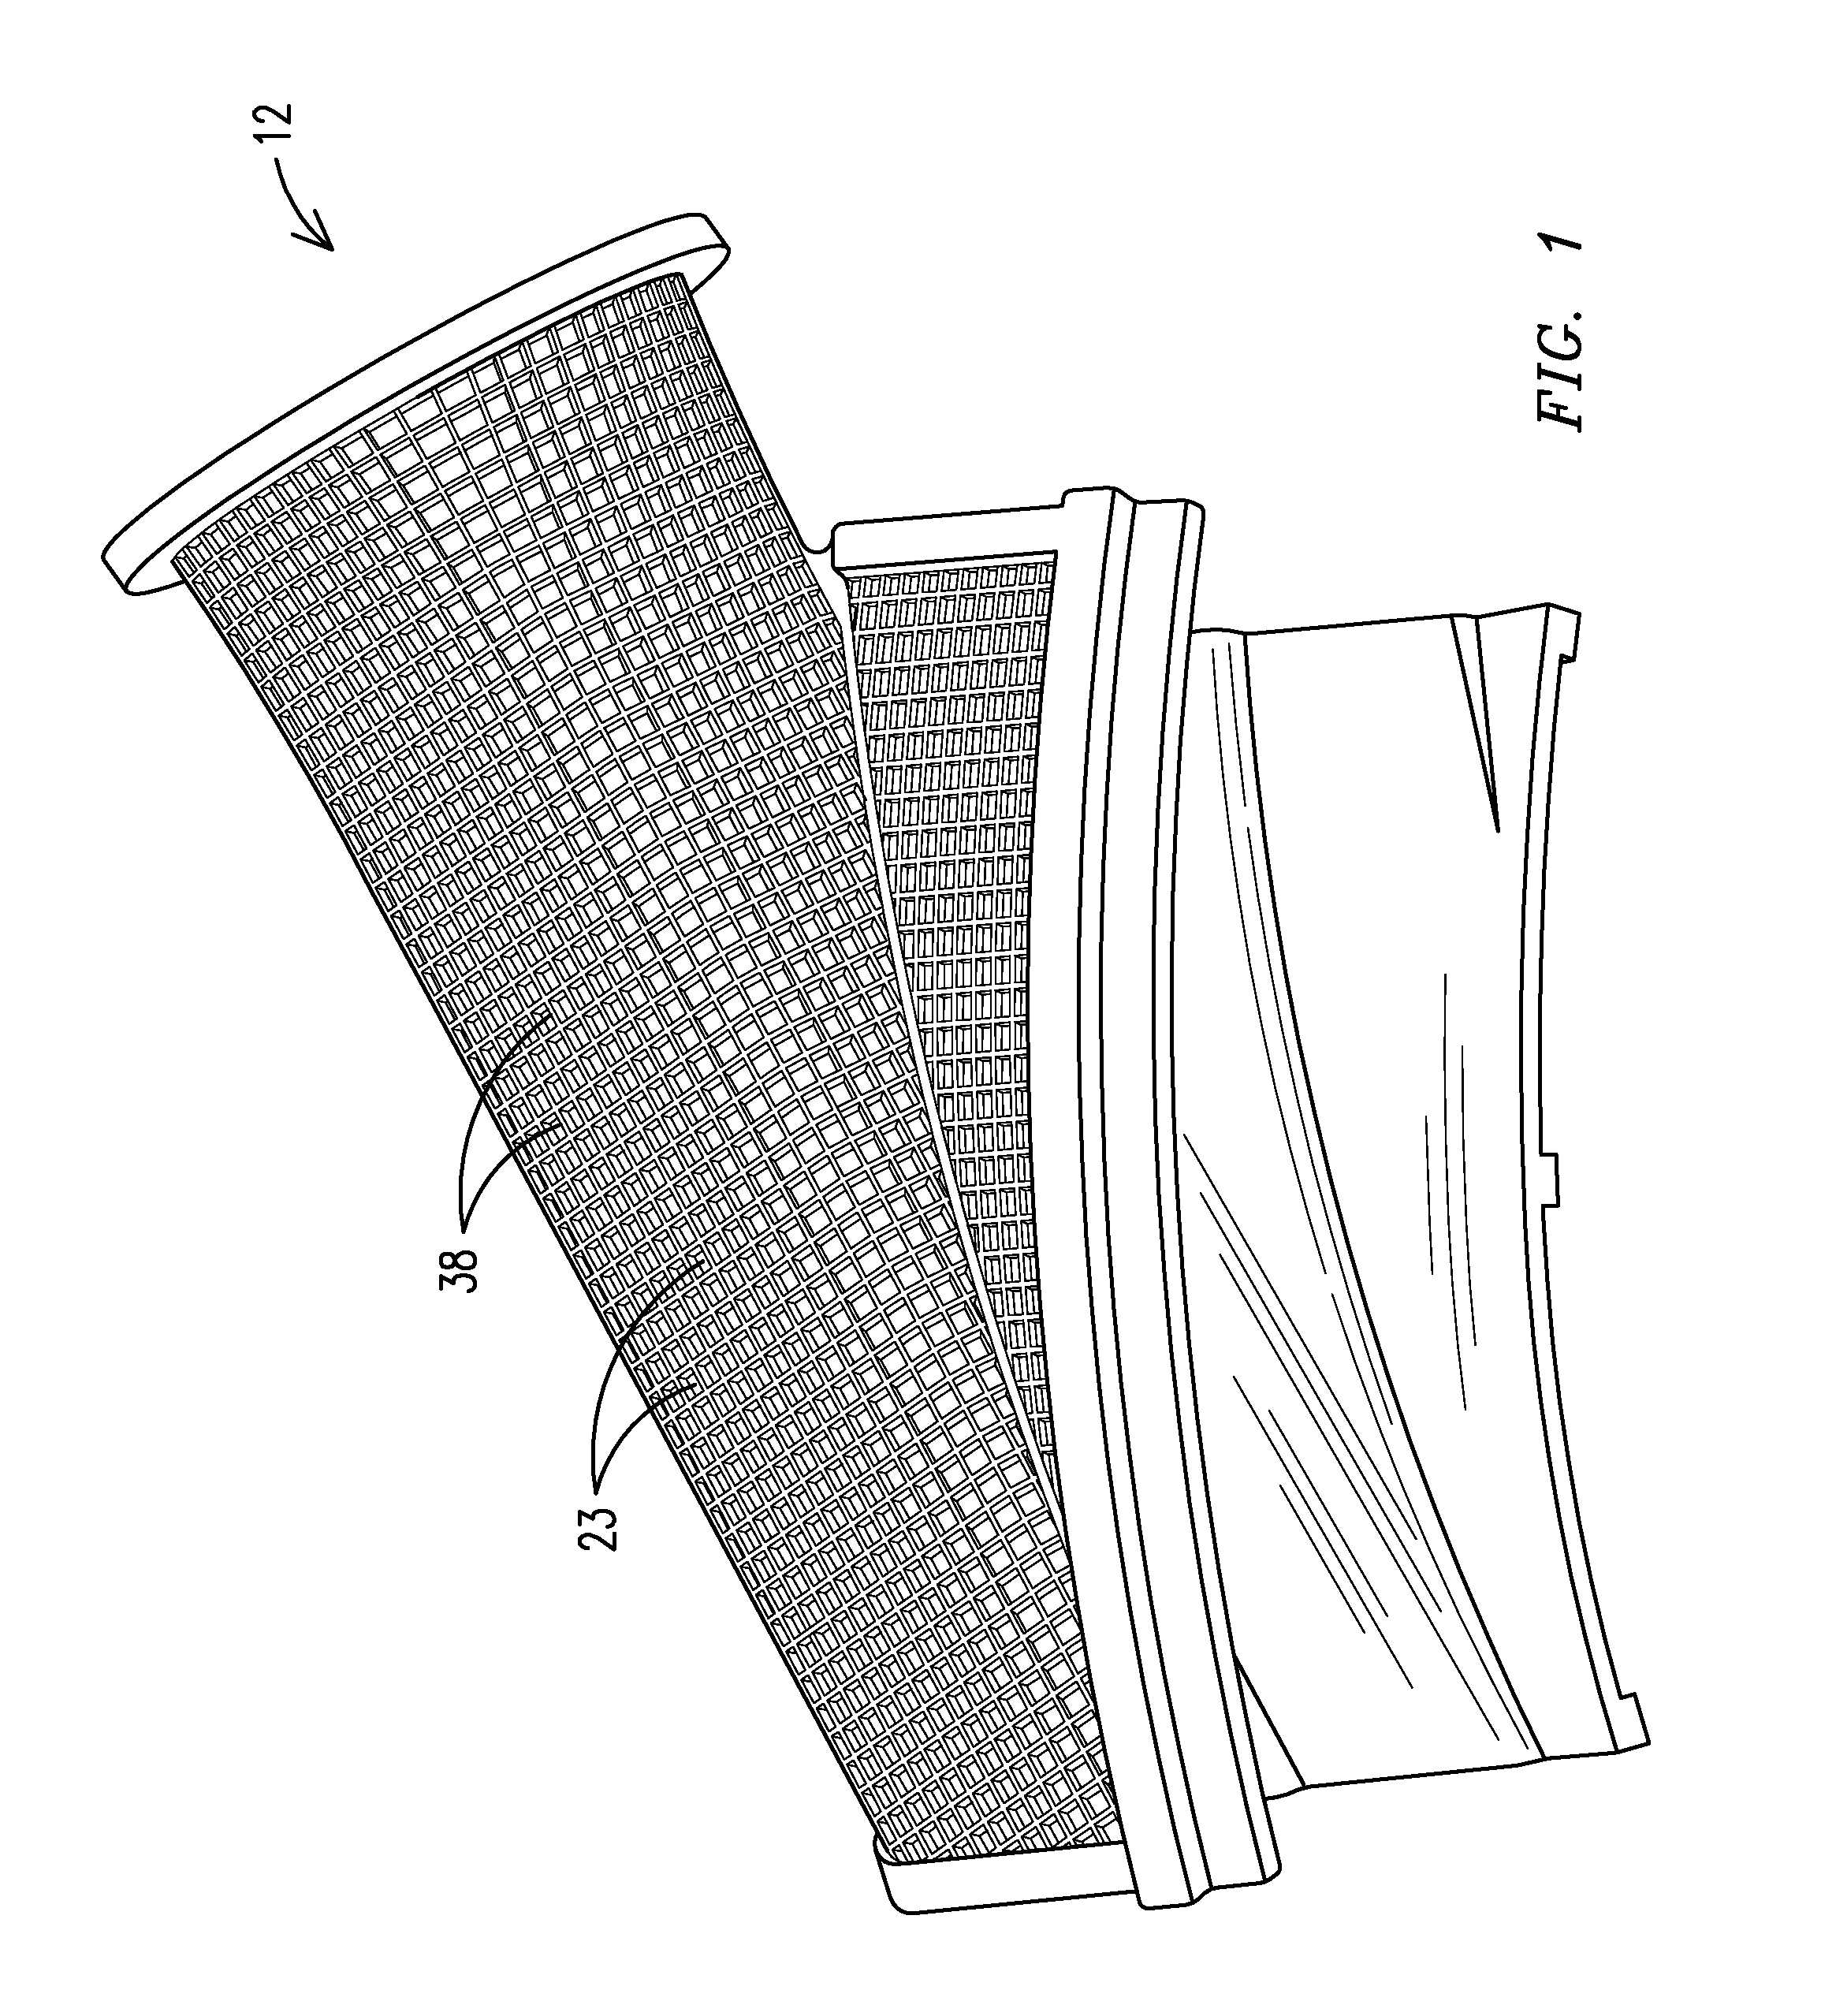 Method of fabricating a nearwall nozzle impingement cooled component for an internal combustion engine